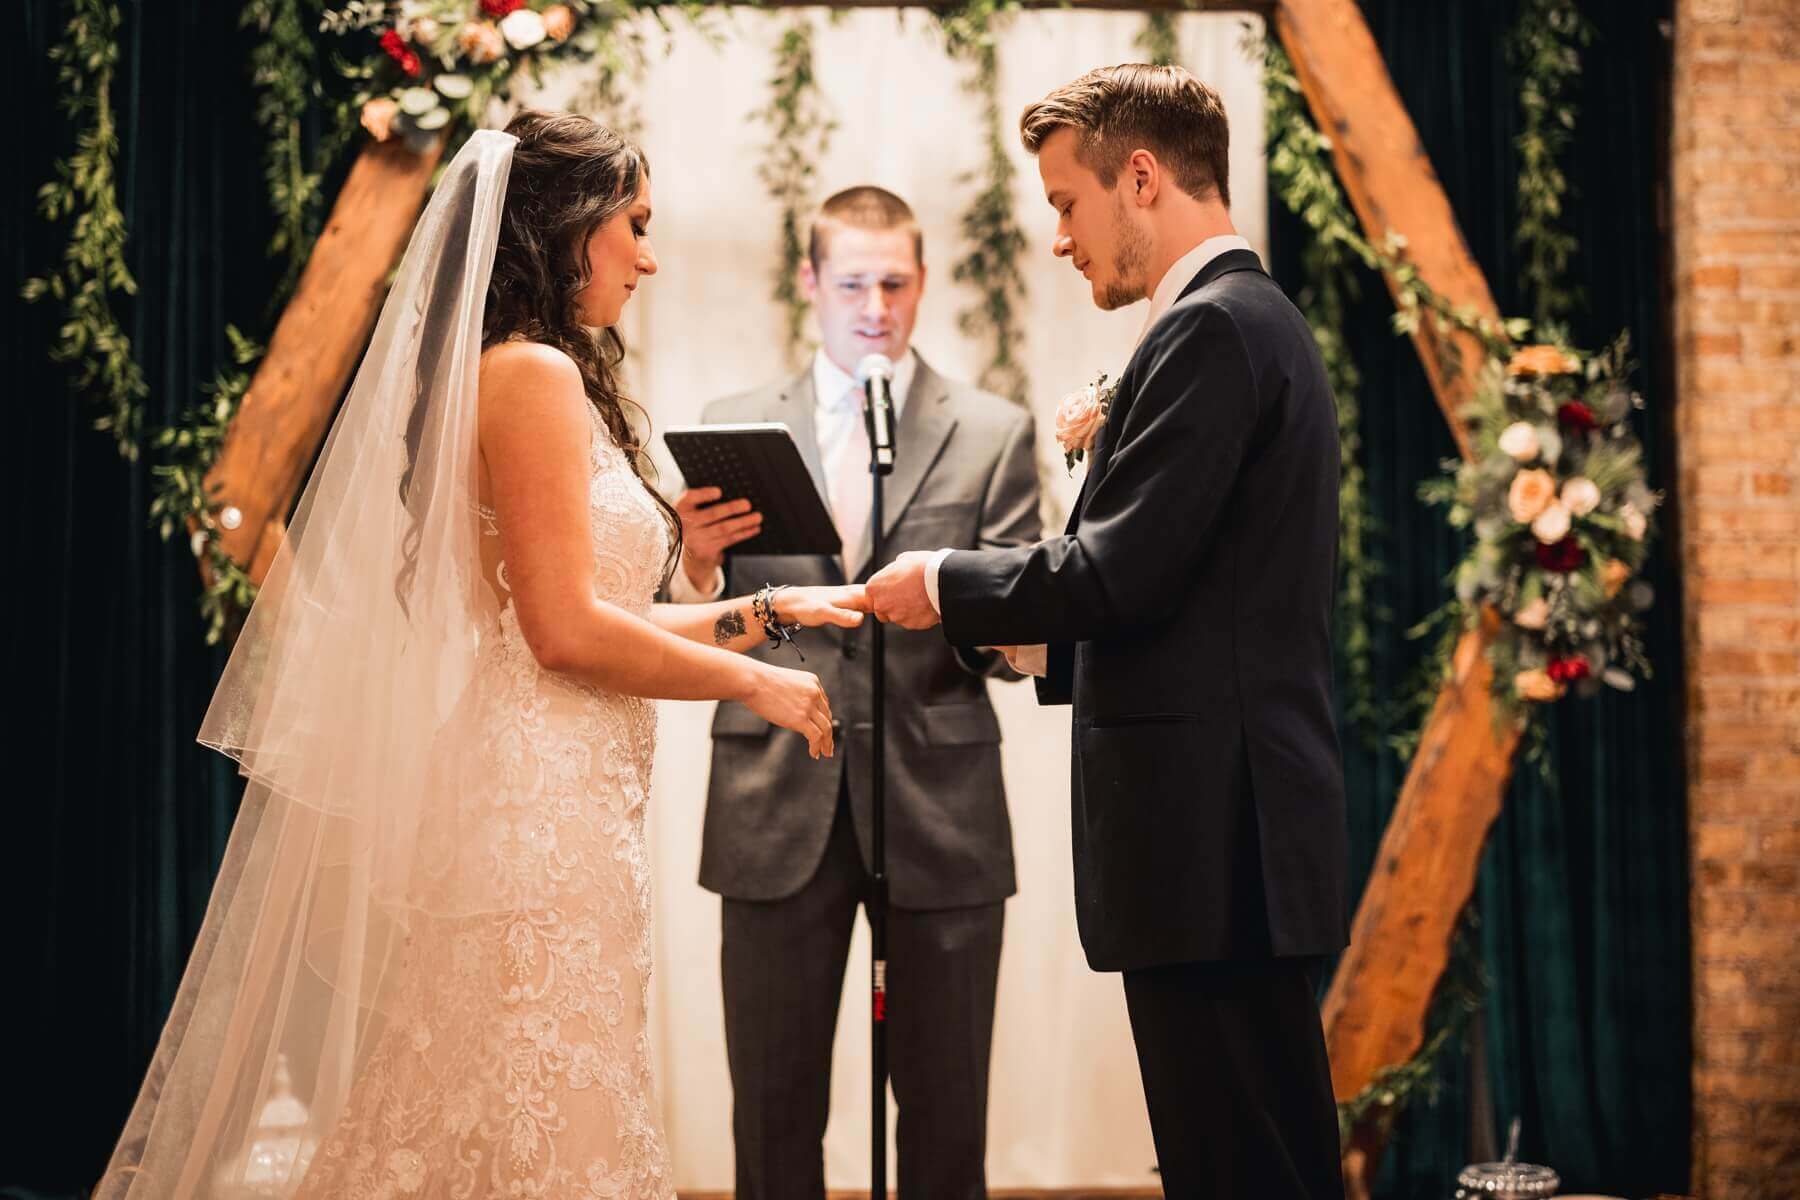 Bride and groom exchanging rings at wedding venue in Illinois